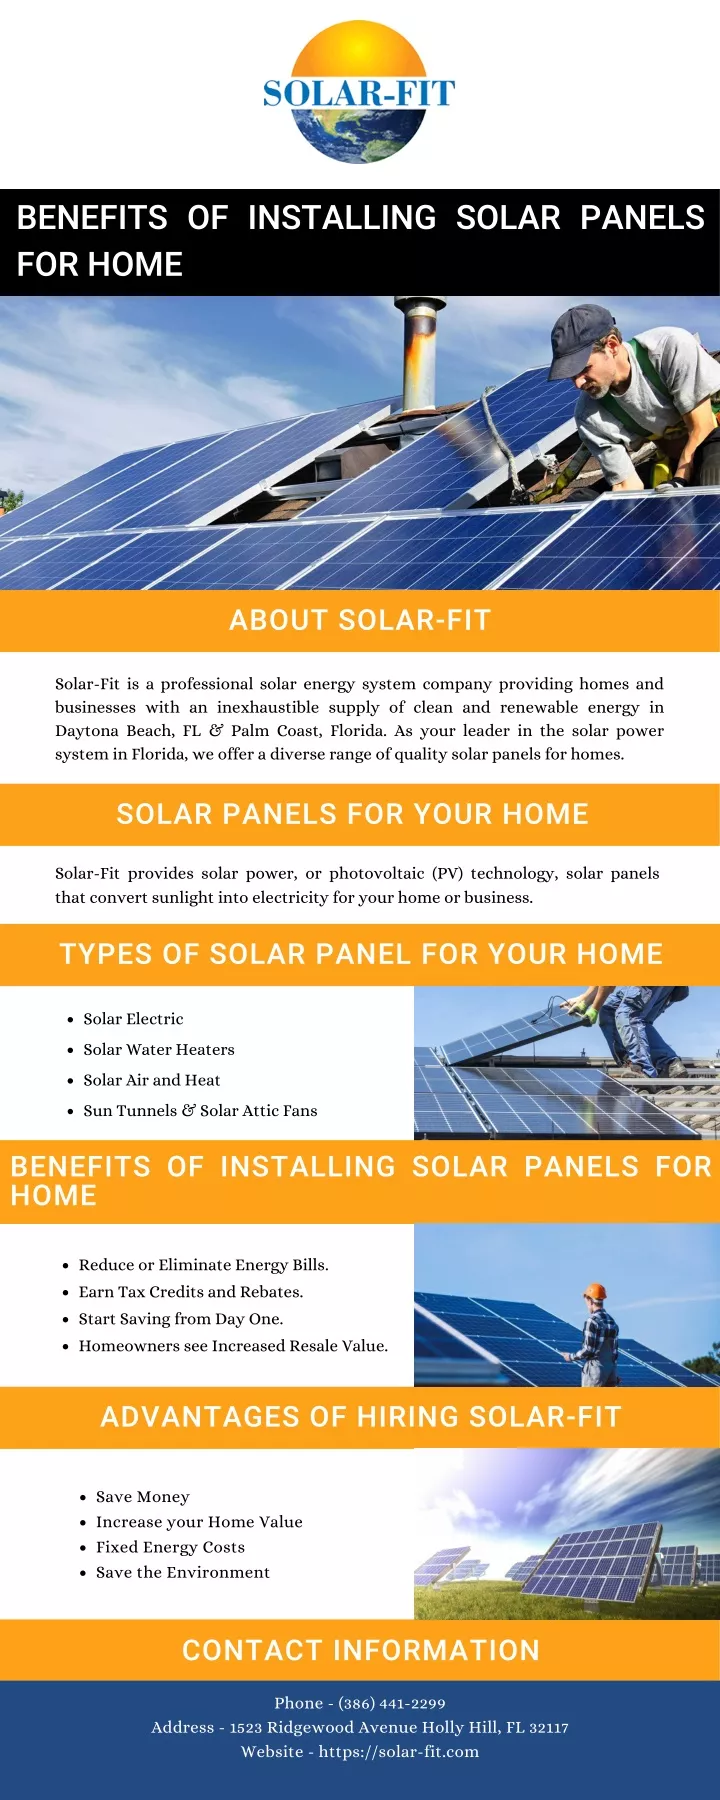 benefits of installing solar panels for home